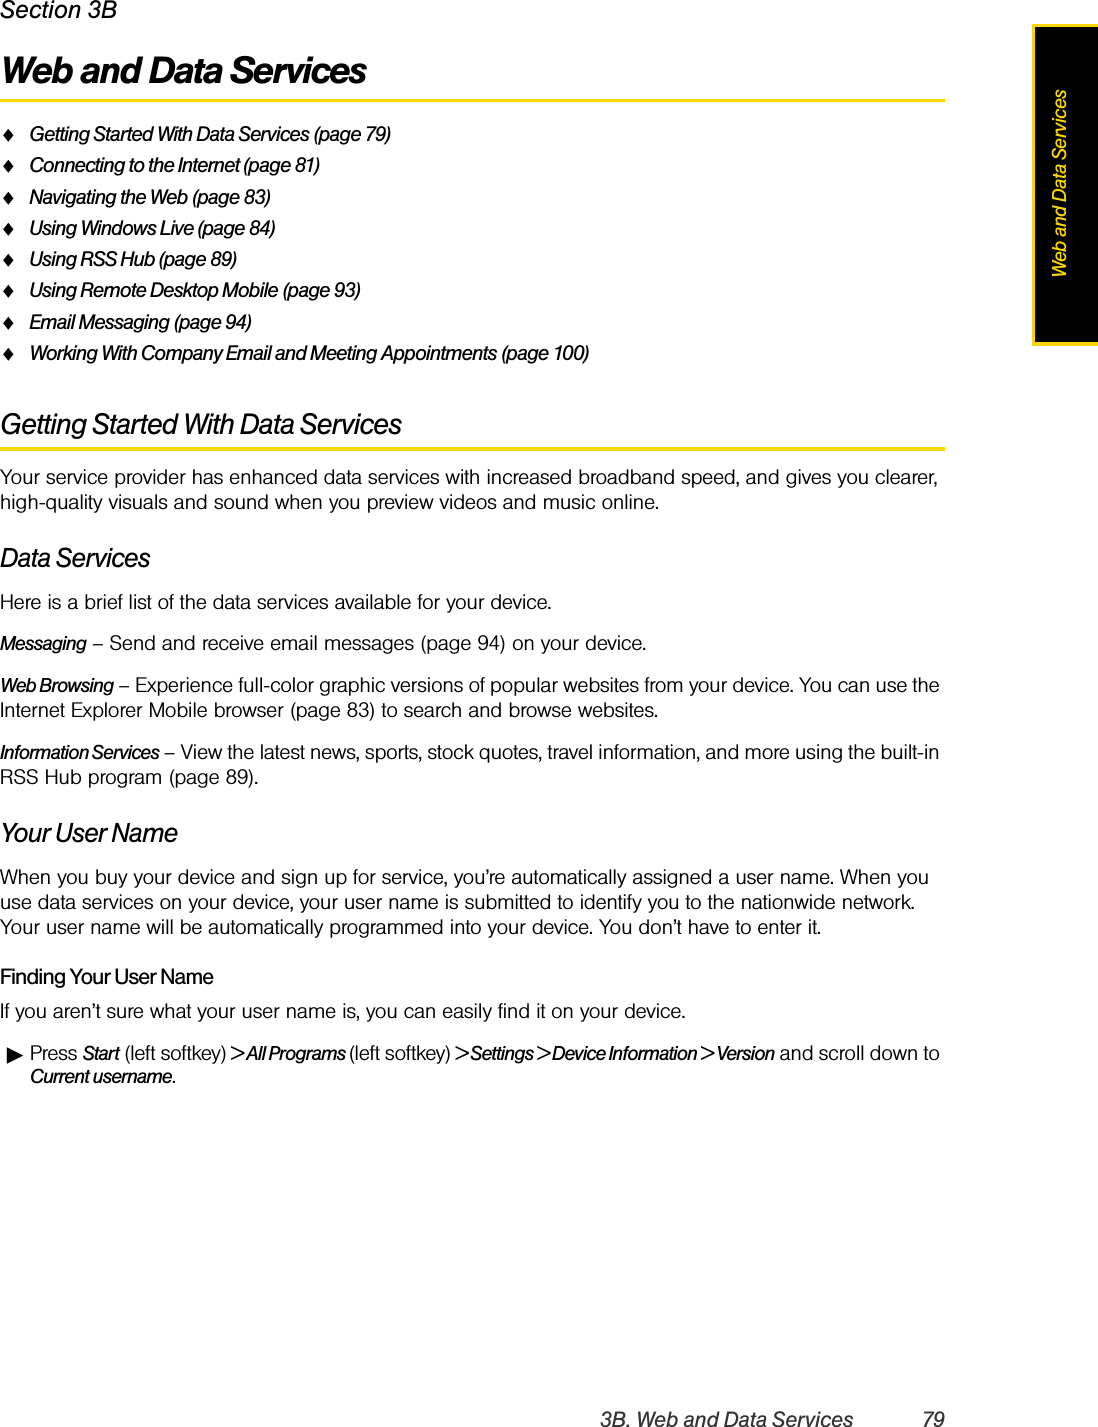 3B. Web and Data Services 79Web and Data ServicesSection 3BWeb and Data ServicesࡗGetting Started With Data Services (page 79)ࡗConnecting to the Internet (page 81)ࡗNavigating the Web (page 83)ࡗUsing Windows Live (page 84)ࡗUsing RSS Hub (page 89)ࡗUsing Remote Desktop Mobile (page 93)ࡗEmail Messaging (page 94)ࡗWorking With Company Email and Meeting Appointments (page 100)Getting Started With Data ServicesYour service provider has enhanced data services with increased broadband speed, and gives you clearer, high-quality visuals and sound when you preview videos and music online. Data ServicesHere is a brief list of the data services available for your device. Messaging – Send and receive email messages (page 94) on your device.Web Browsing – Experience full-color graphic versions of popular websites from your device. You can use the Internet Explorer Mobile browser (page 83) to search and browse websites.Information Services – View the latest news, sports, stock quotes, travel information, and more using the built-in RSS Hub program (page 89).Your User NameWhen you buy your device and sign up for service, you’re automatically assigned a user name. When you use data services on your device, your user name is submitted to identify you to the nationwide network. Your user name will be automatically programmed into your device. You don’t have to enter it.Finding Your User NameIf you aren’t sure what your user name is, you can easily find it on your device.ᮣPress Start (left softkey) &gt; All Programs (left softkey) &gt; Settings &gt; Device Information &gt; Version and scroll down to Current username.